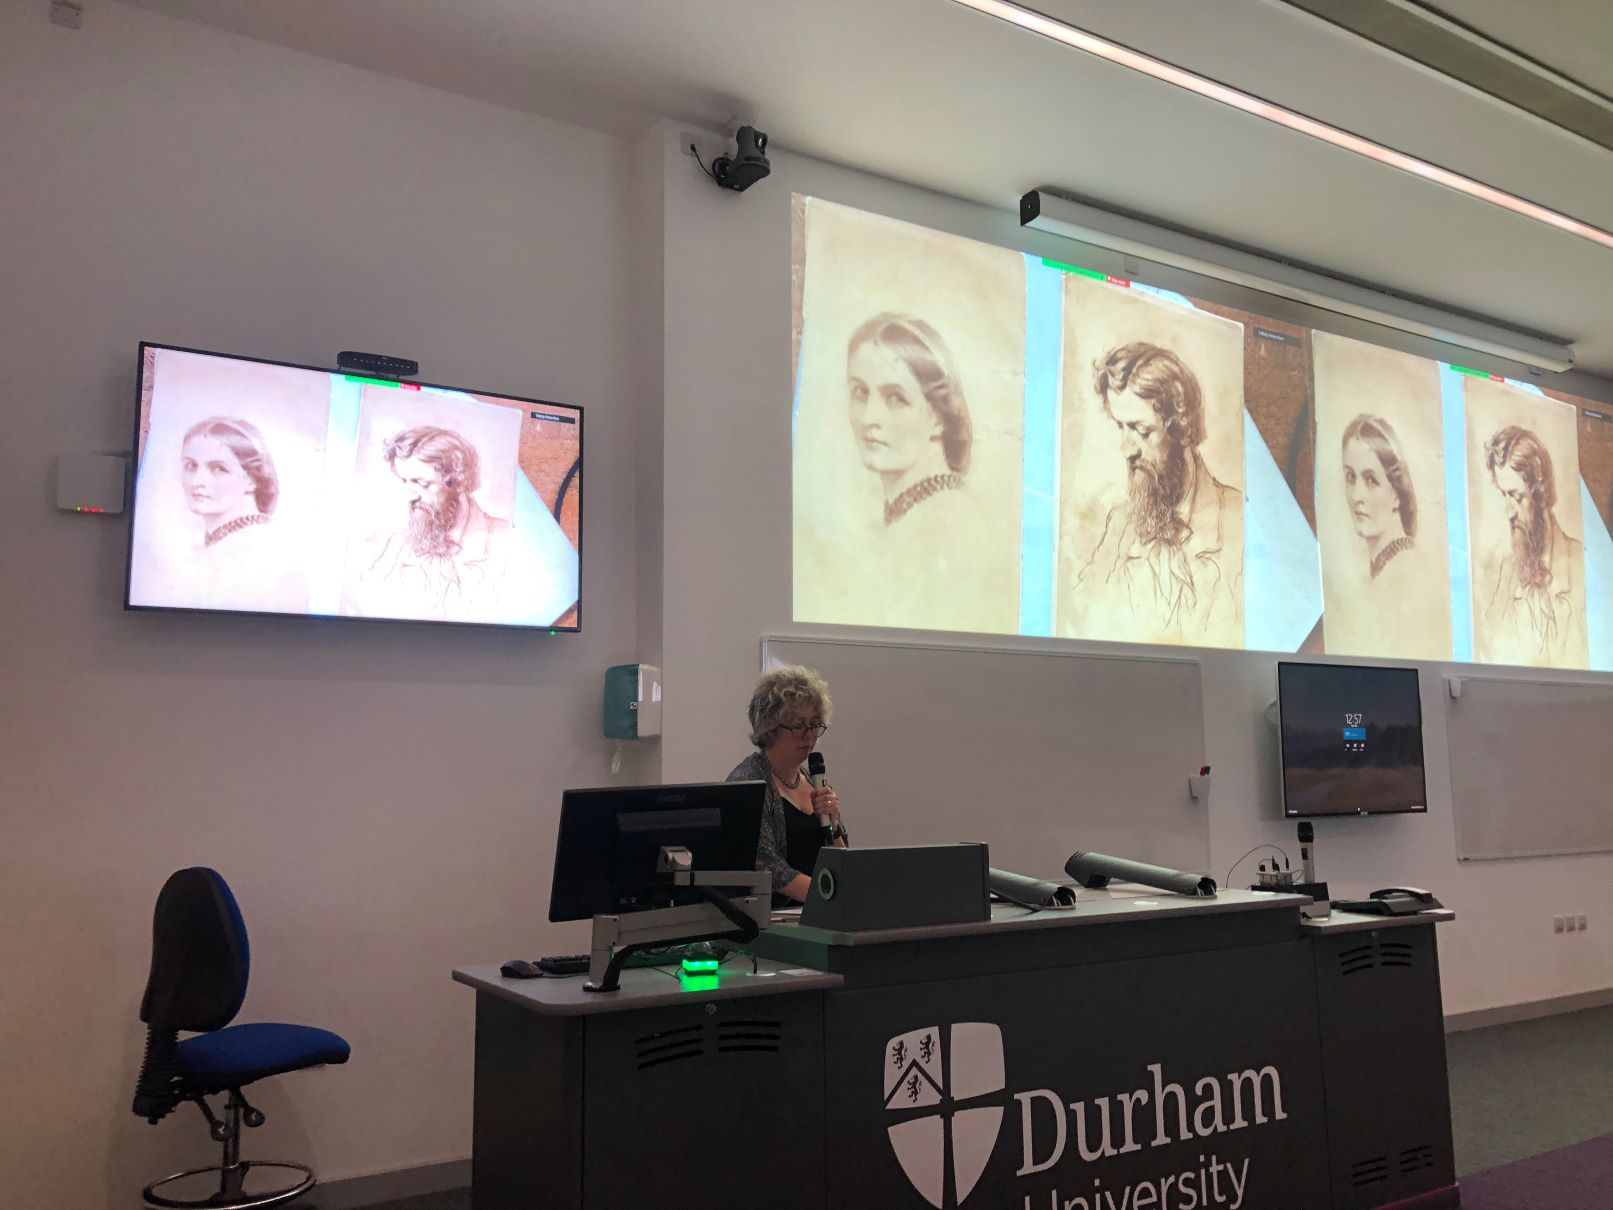 Debbie Challis speaks into a microphone behind a Durham University lecture podium, next to several projector screens, presenting to an out-of-frame lecture theatre audience.